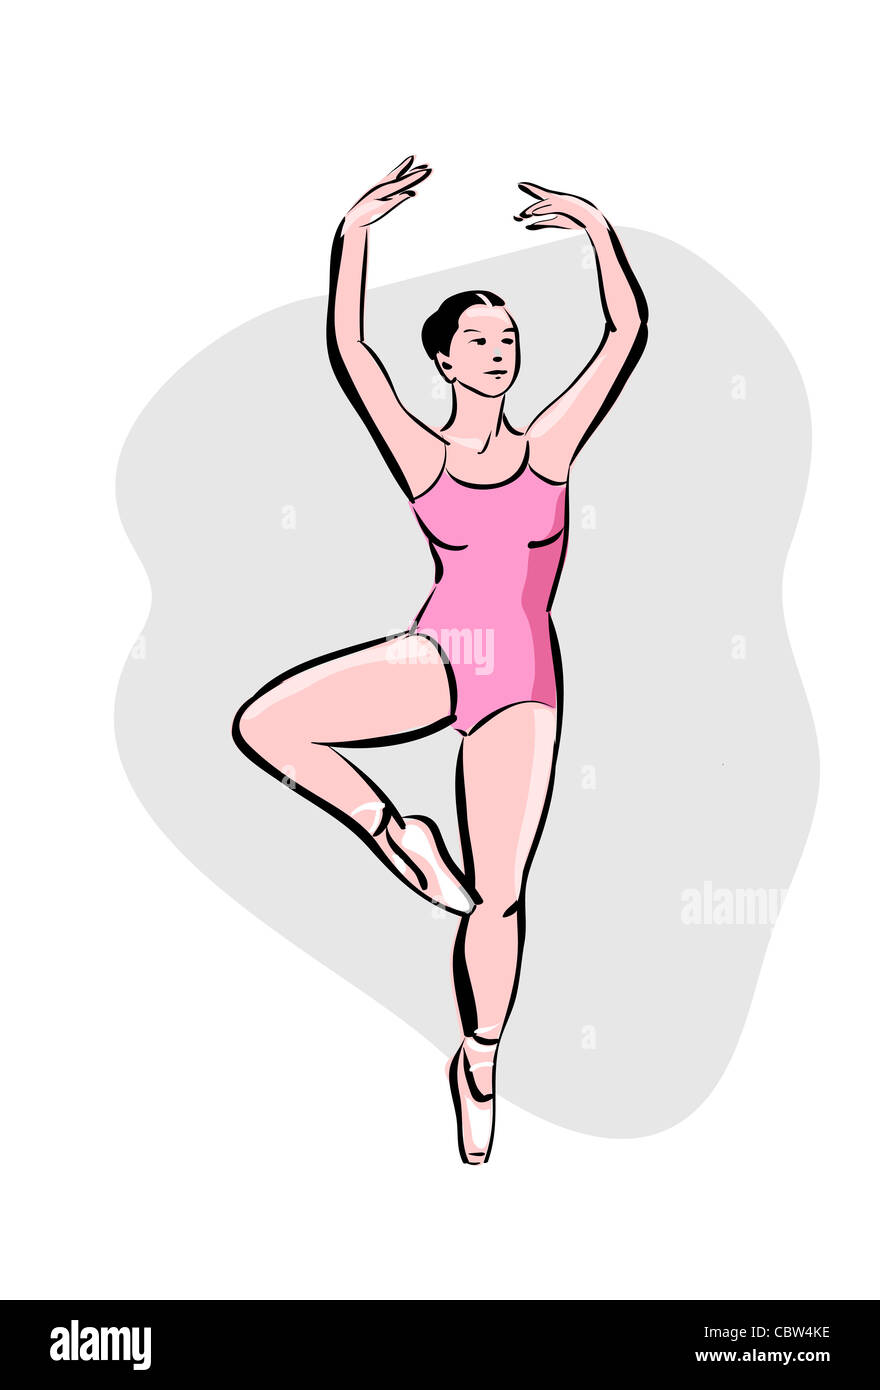 Sketches of the ballet dancers Stock Illustration by ©mubaister@gmail.com  #139721656